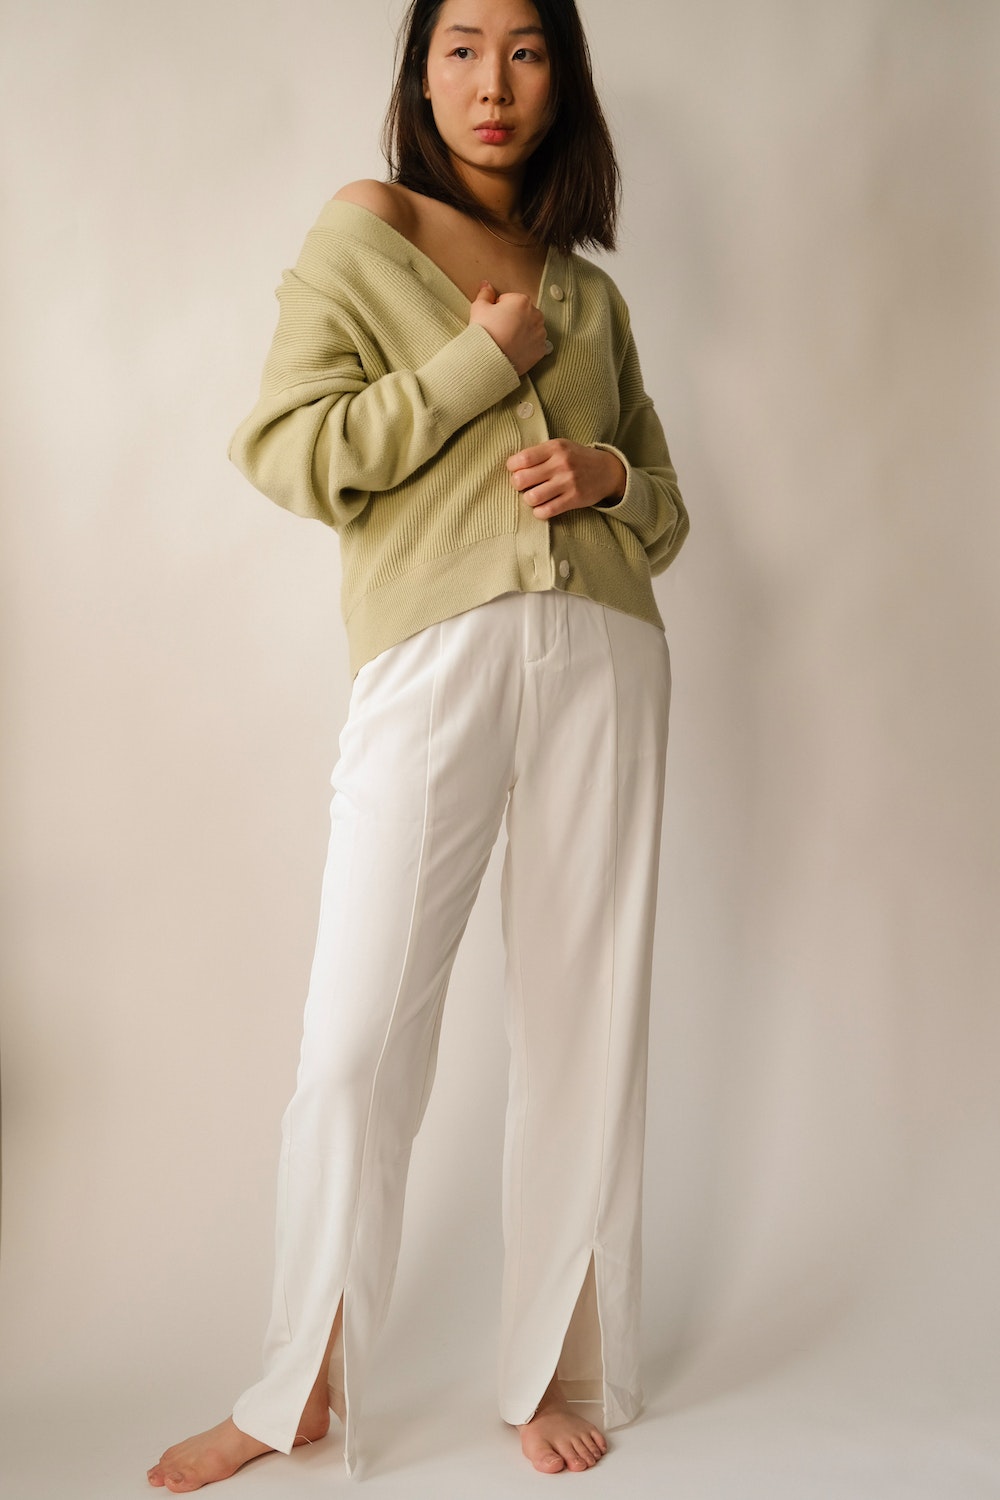 White Pants: 40 Best Outfits For Women In 2023 cardigan